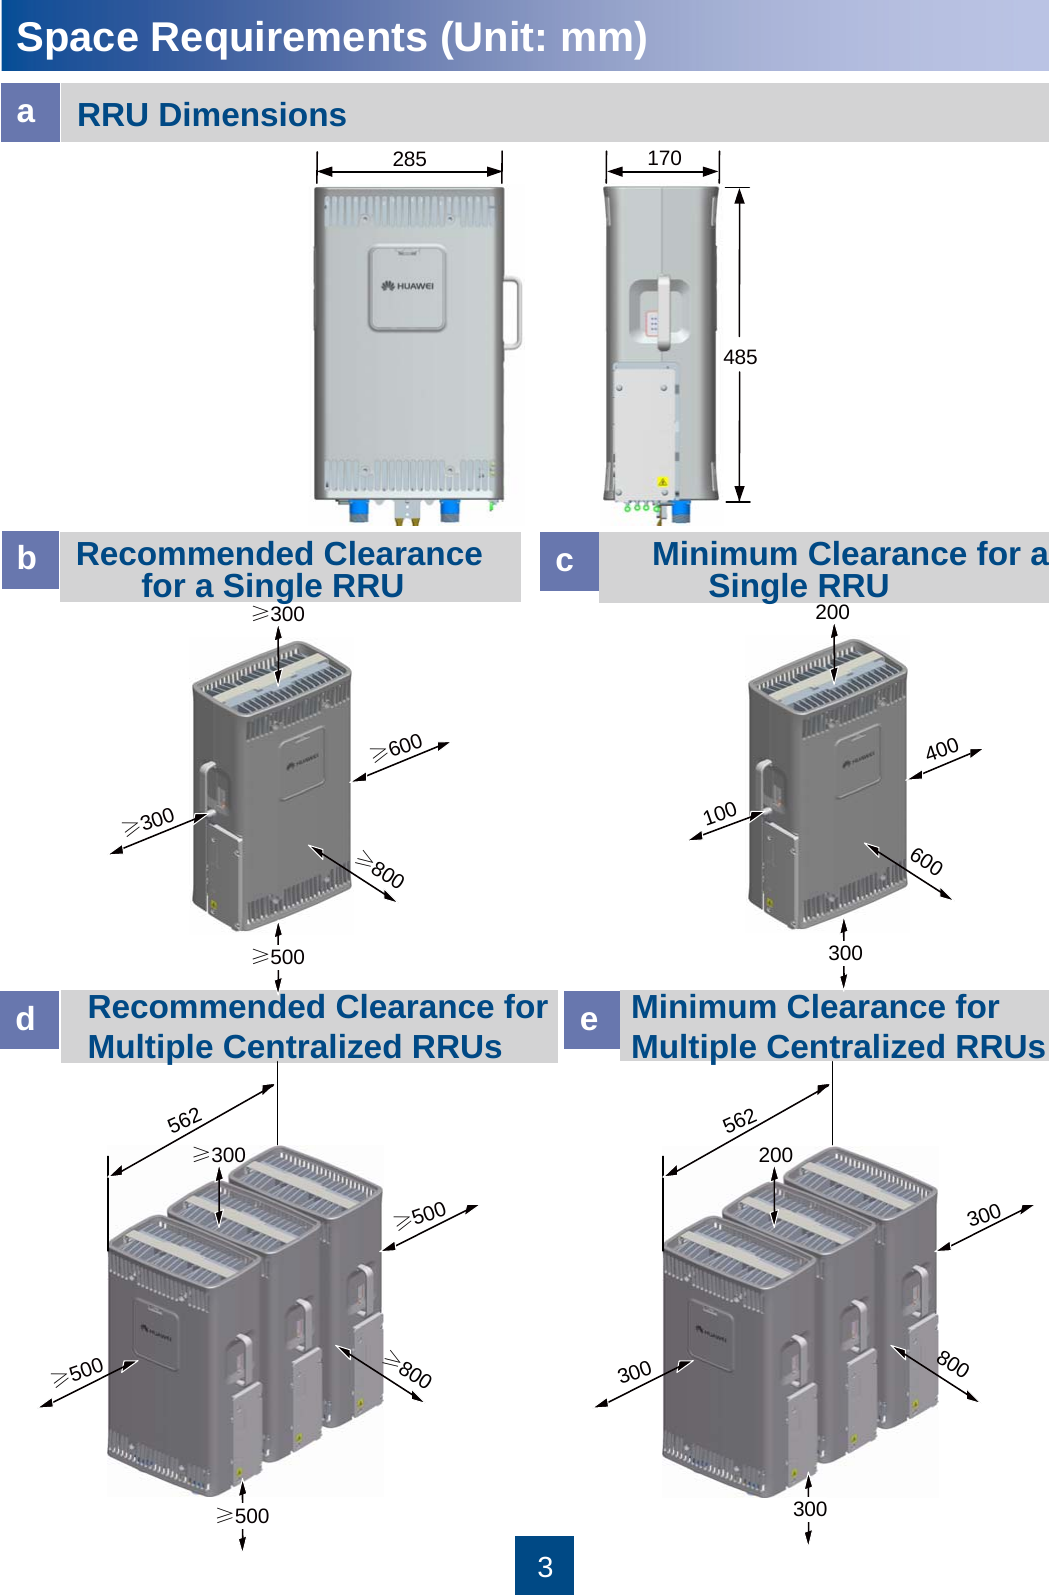 Space Requirements (Unit: mm)abcdRRU DimensionsRecommended Clearance for a Single RRU Minimum Clearance for a Single RRURecommended Clearance for Multiple Centralized RRUs eMinimum Clearance for Multiple Centralized RRUs3285485170≥300≥800≥300≥600≥500100600200400300≥500≥500≥300562≥800≥500300300200562800300